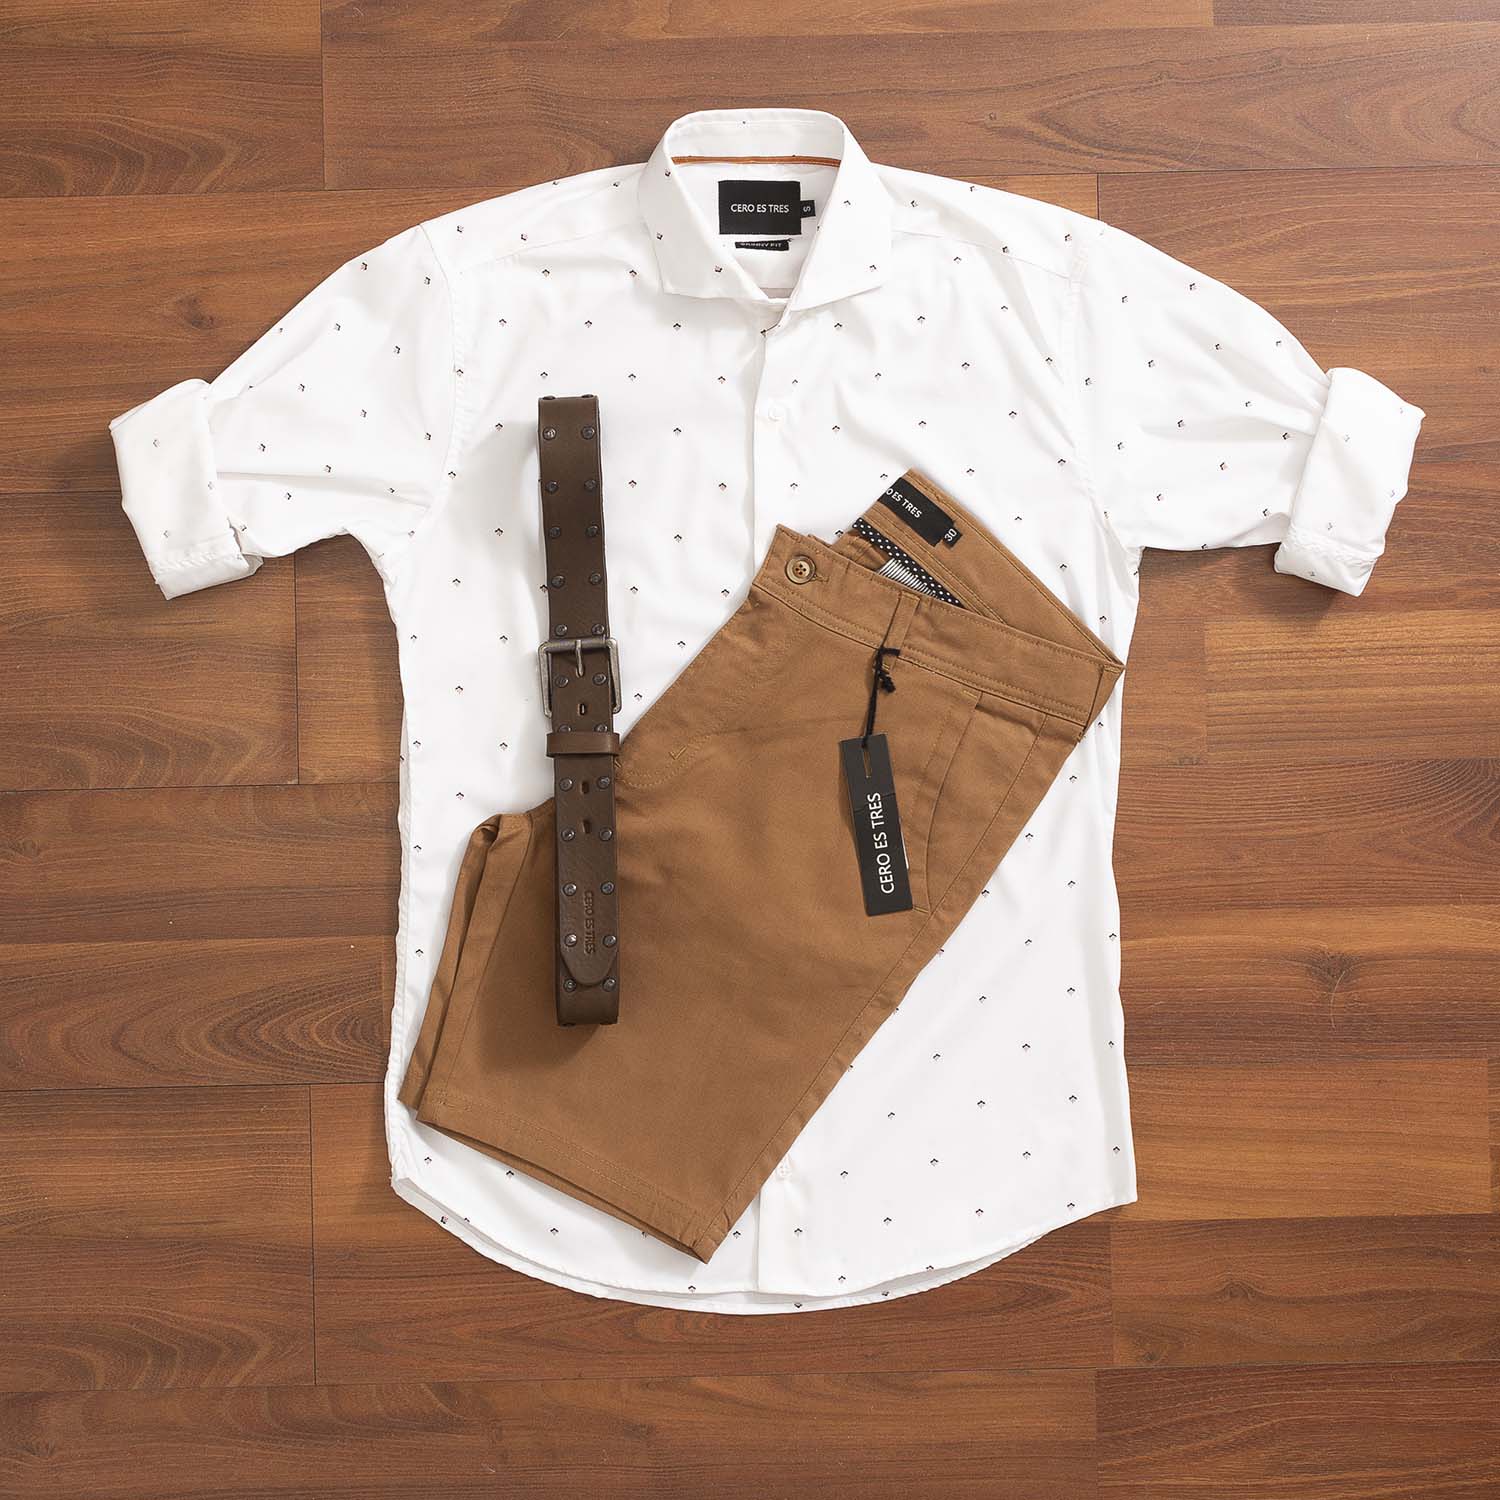 OUTFIT CERO 494